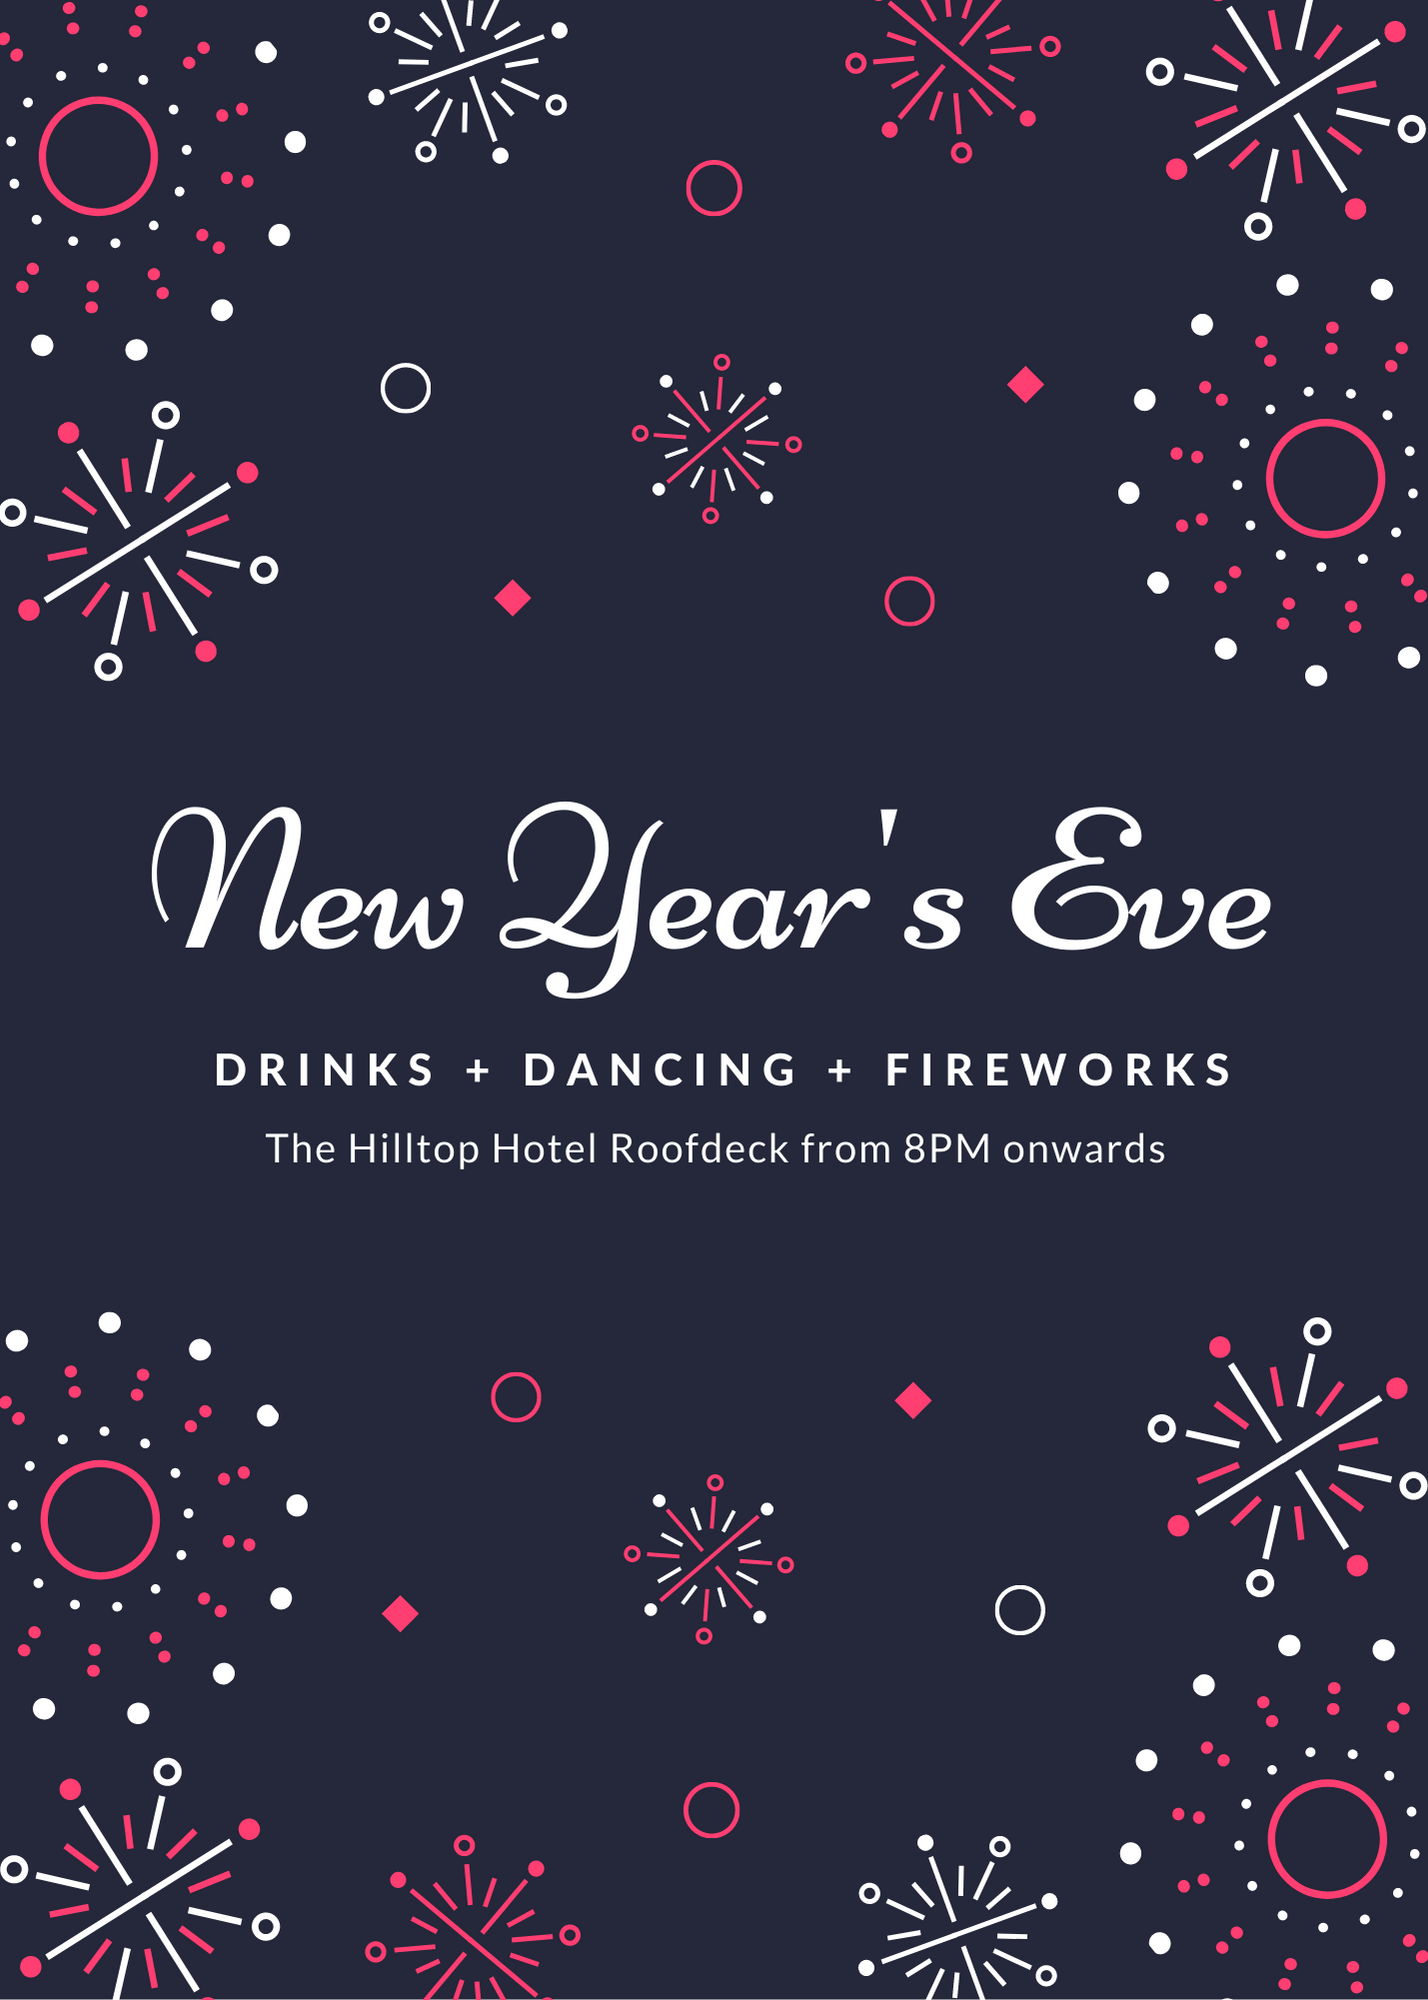 A navy blue invitation to a New Year's Eve party decorated with white and pink fireworks